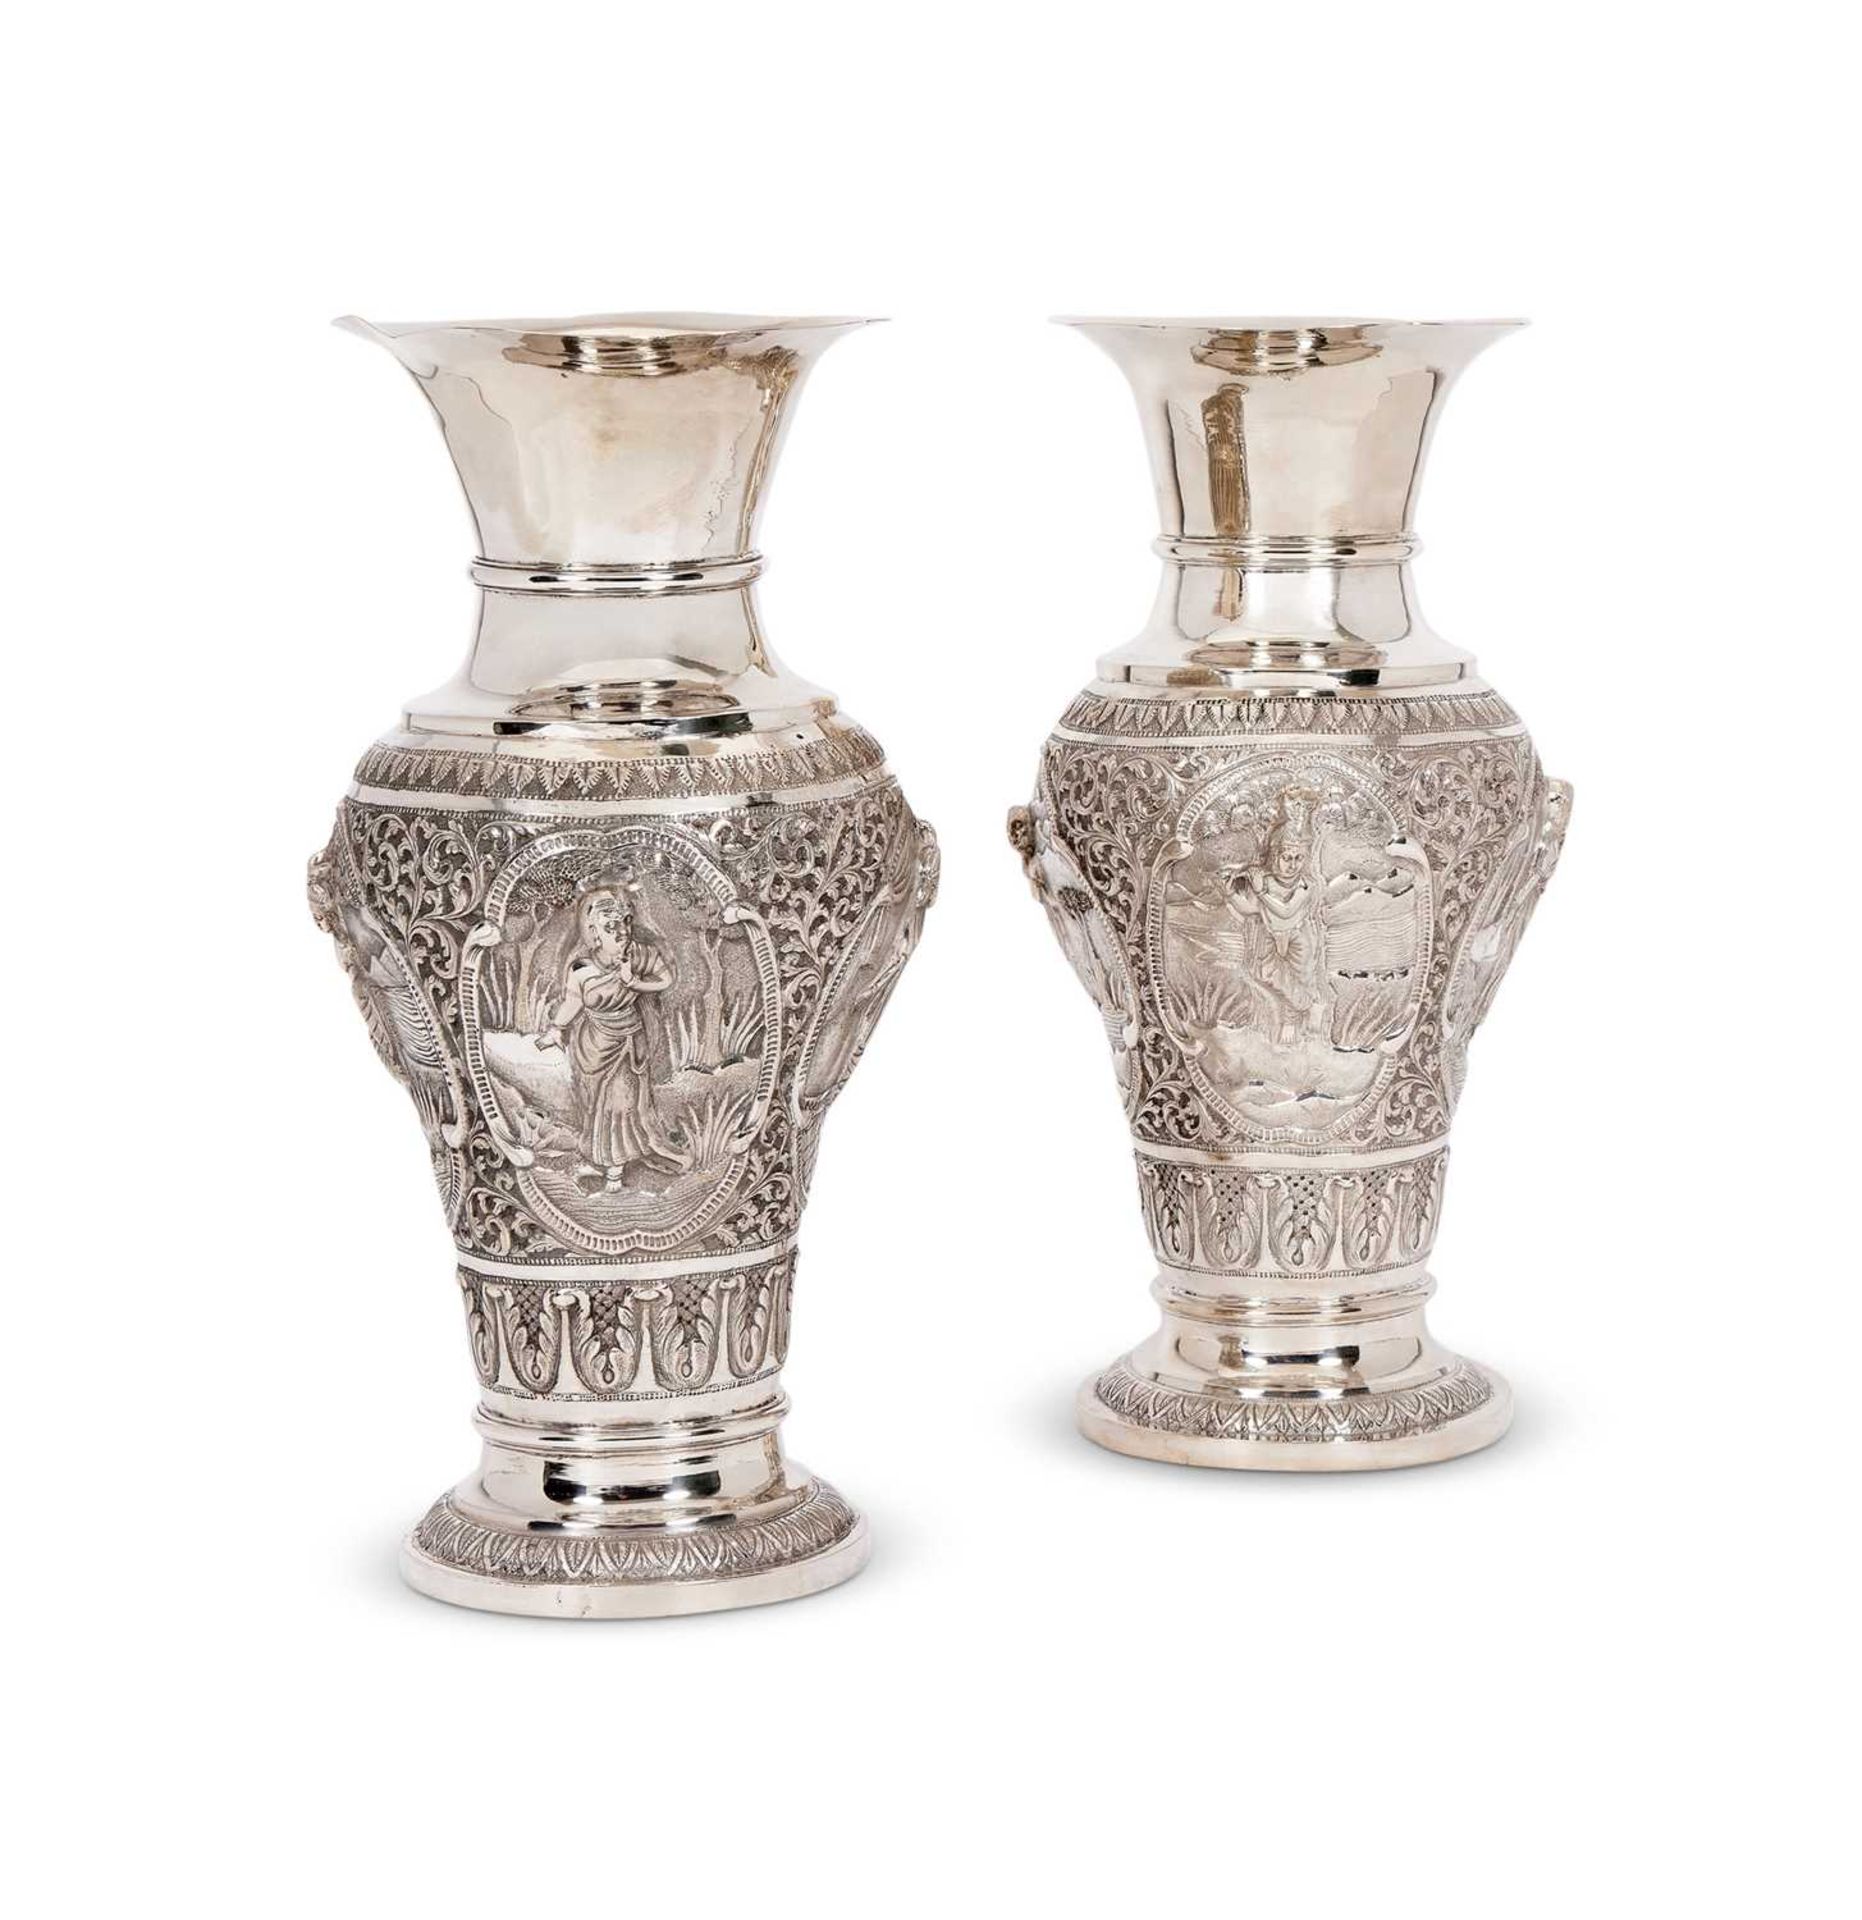 A PAIR OF LATE 19TH CENTURY INDIAN SILVER VASES